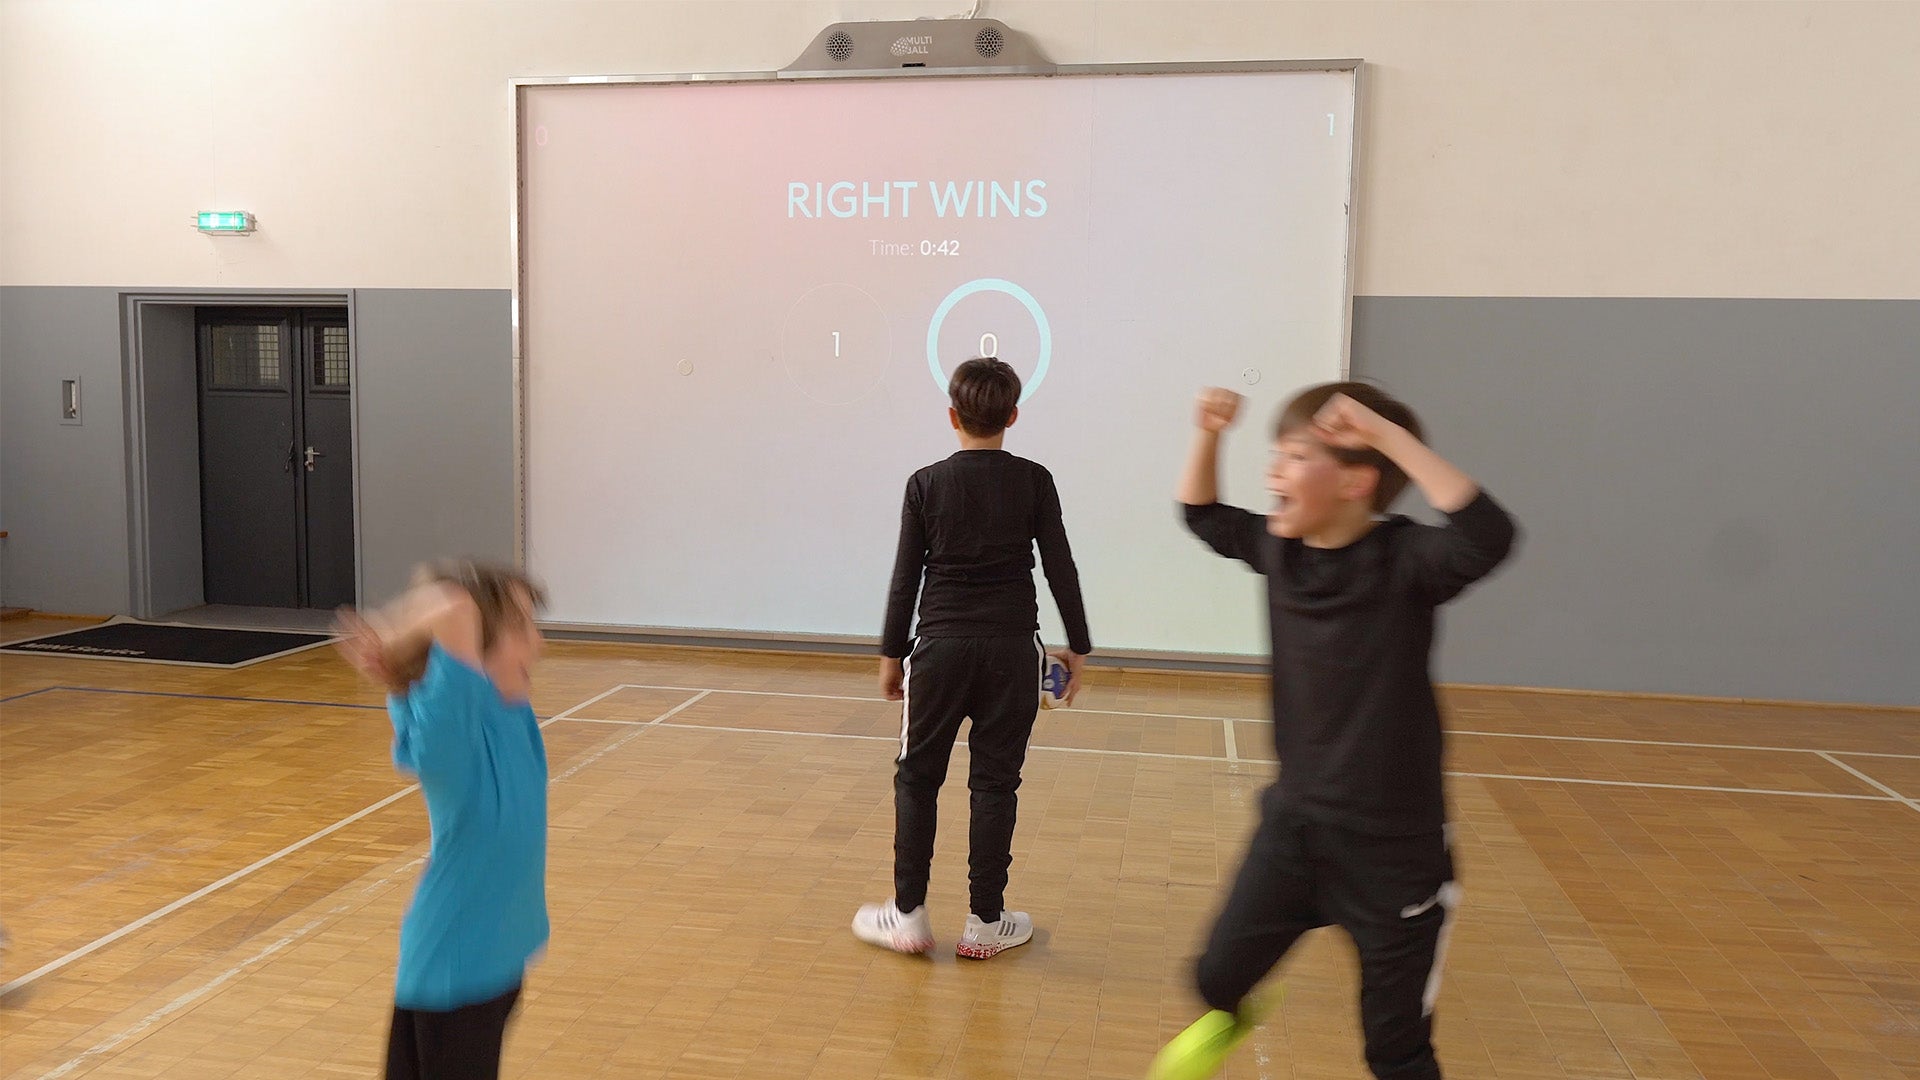 Two kids celebrate a win in a handball game on MultiBall